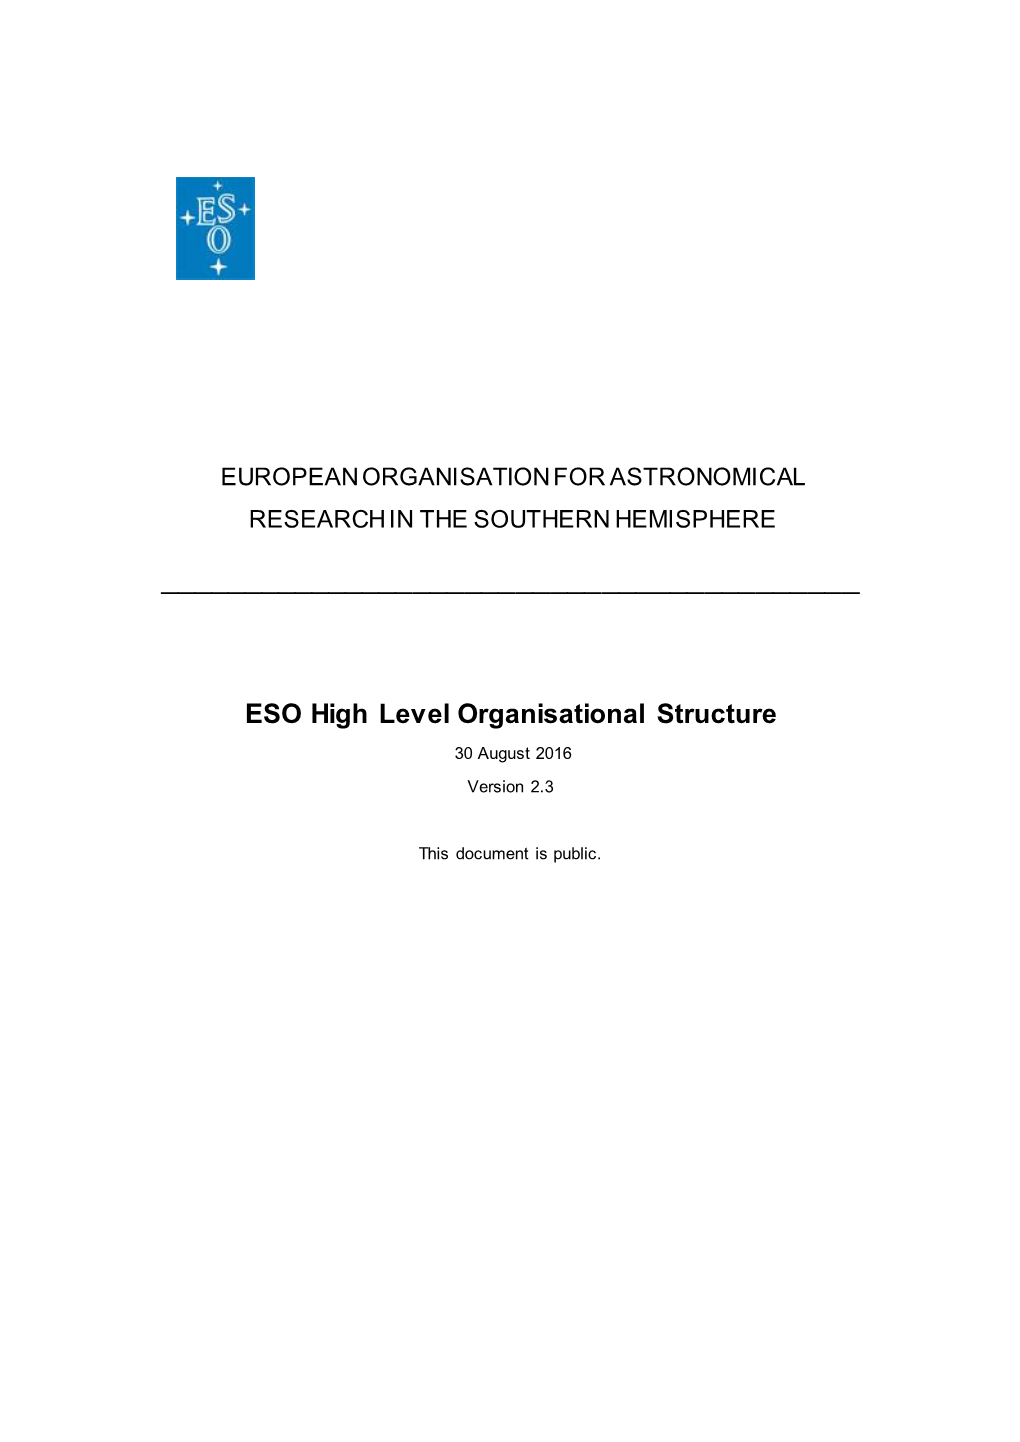 ESO High Level Organisational Structure